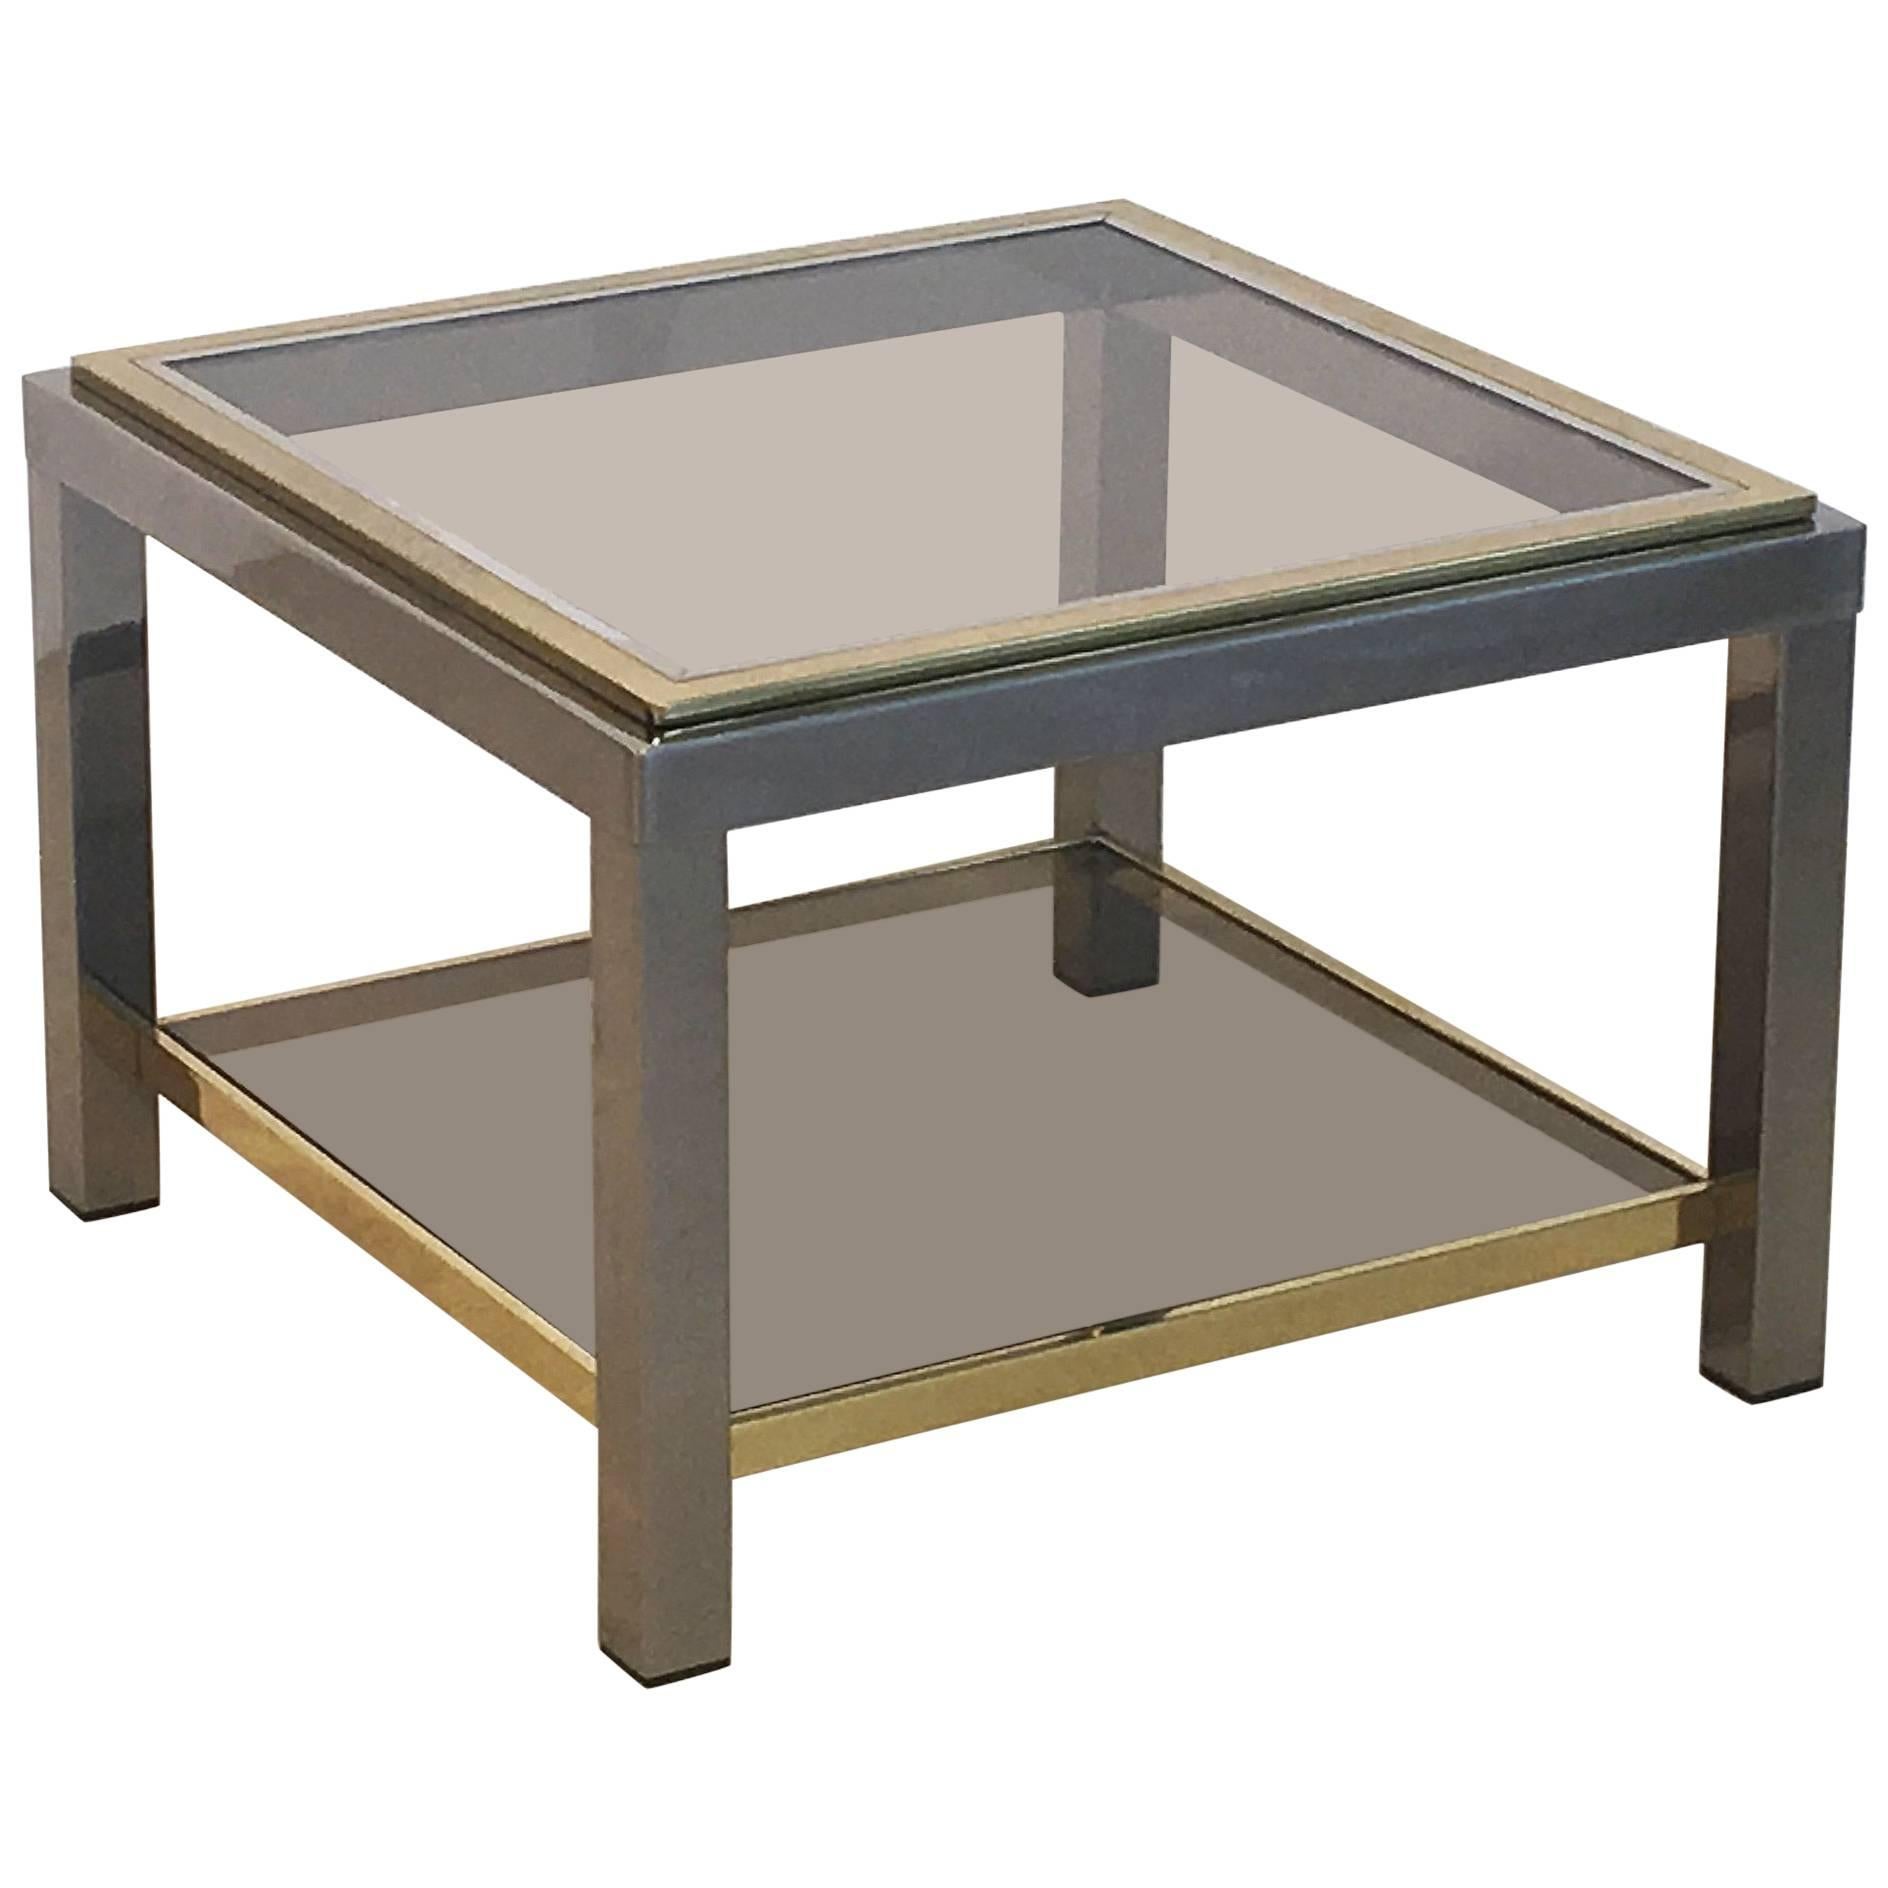 Italian Square Low Table of Brass, Chrome, and Smoked Glass by Zevi